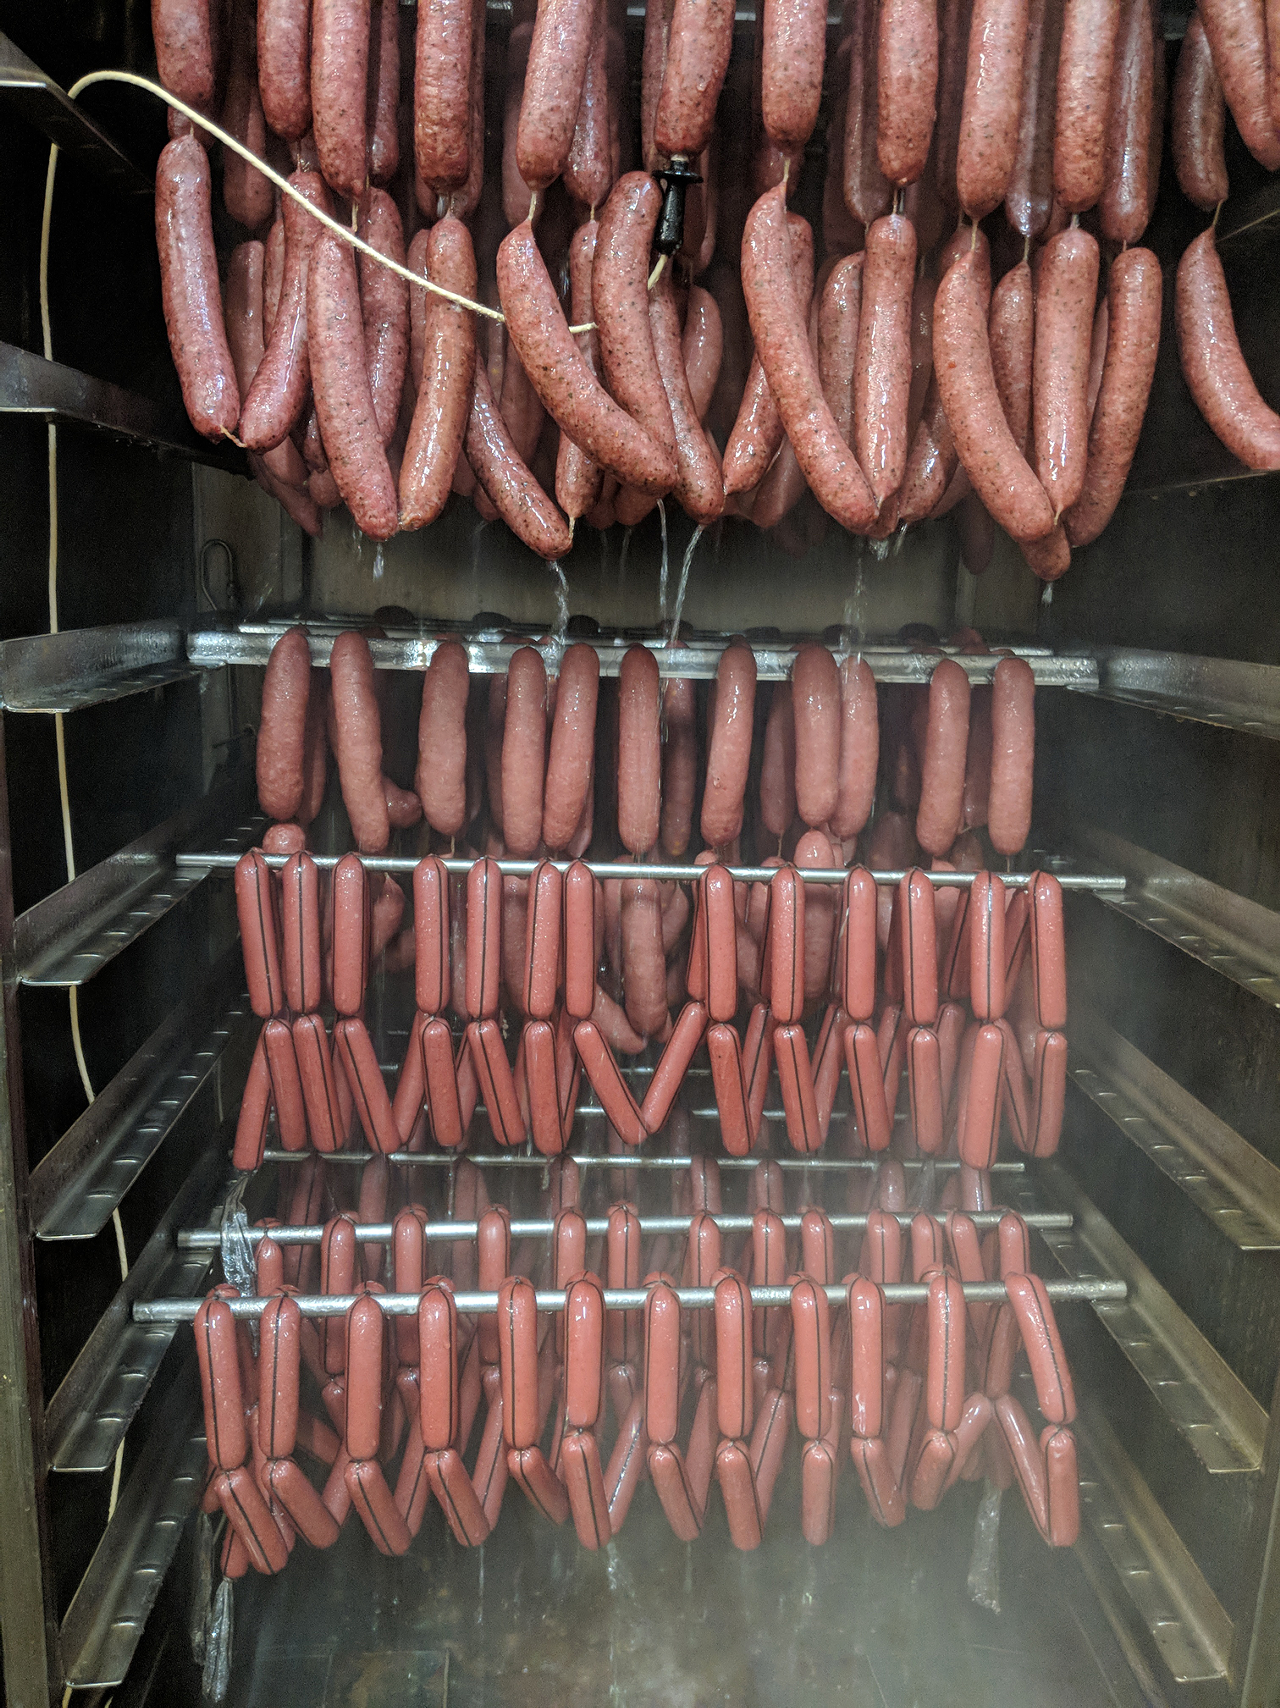 Hot dogs and sausages steaming in Avril-Bleh's steam room.